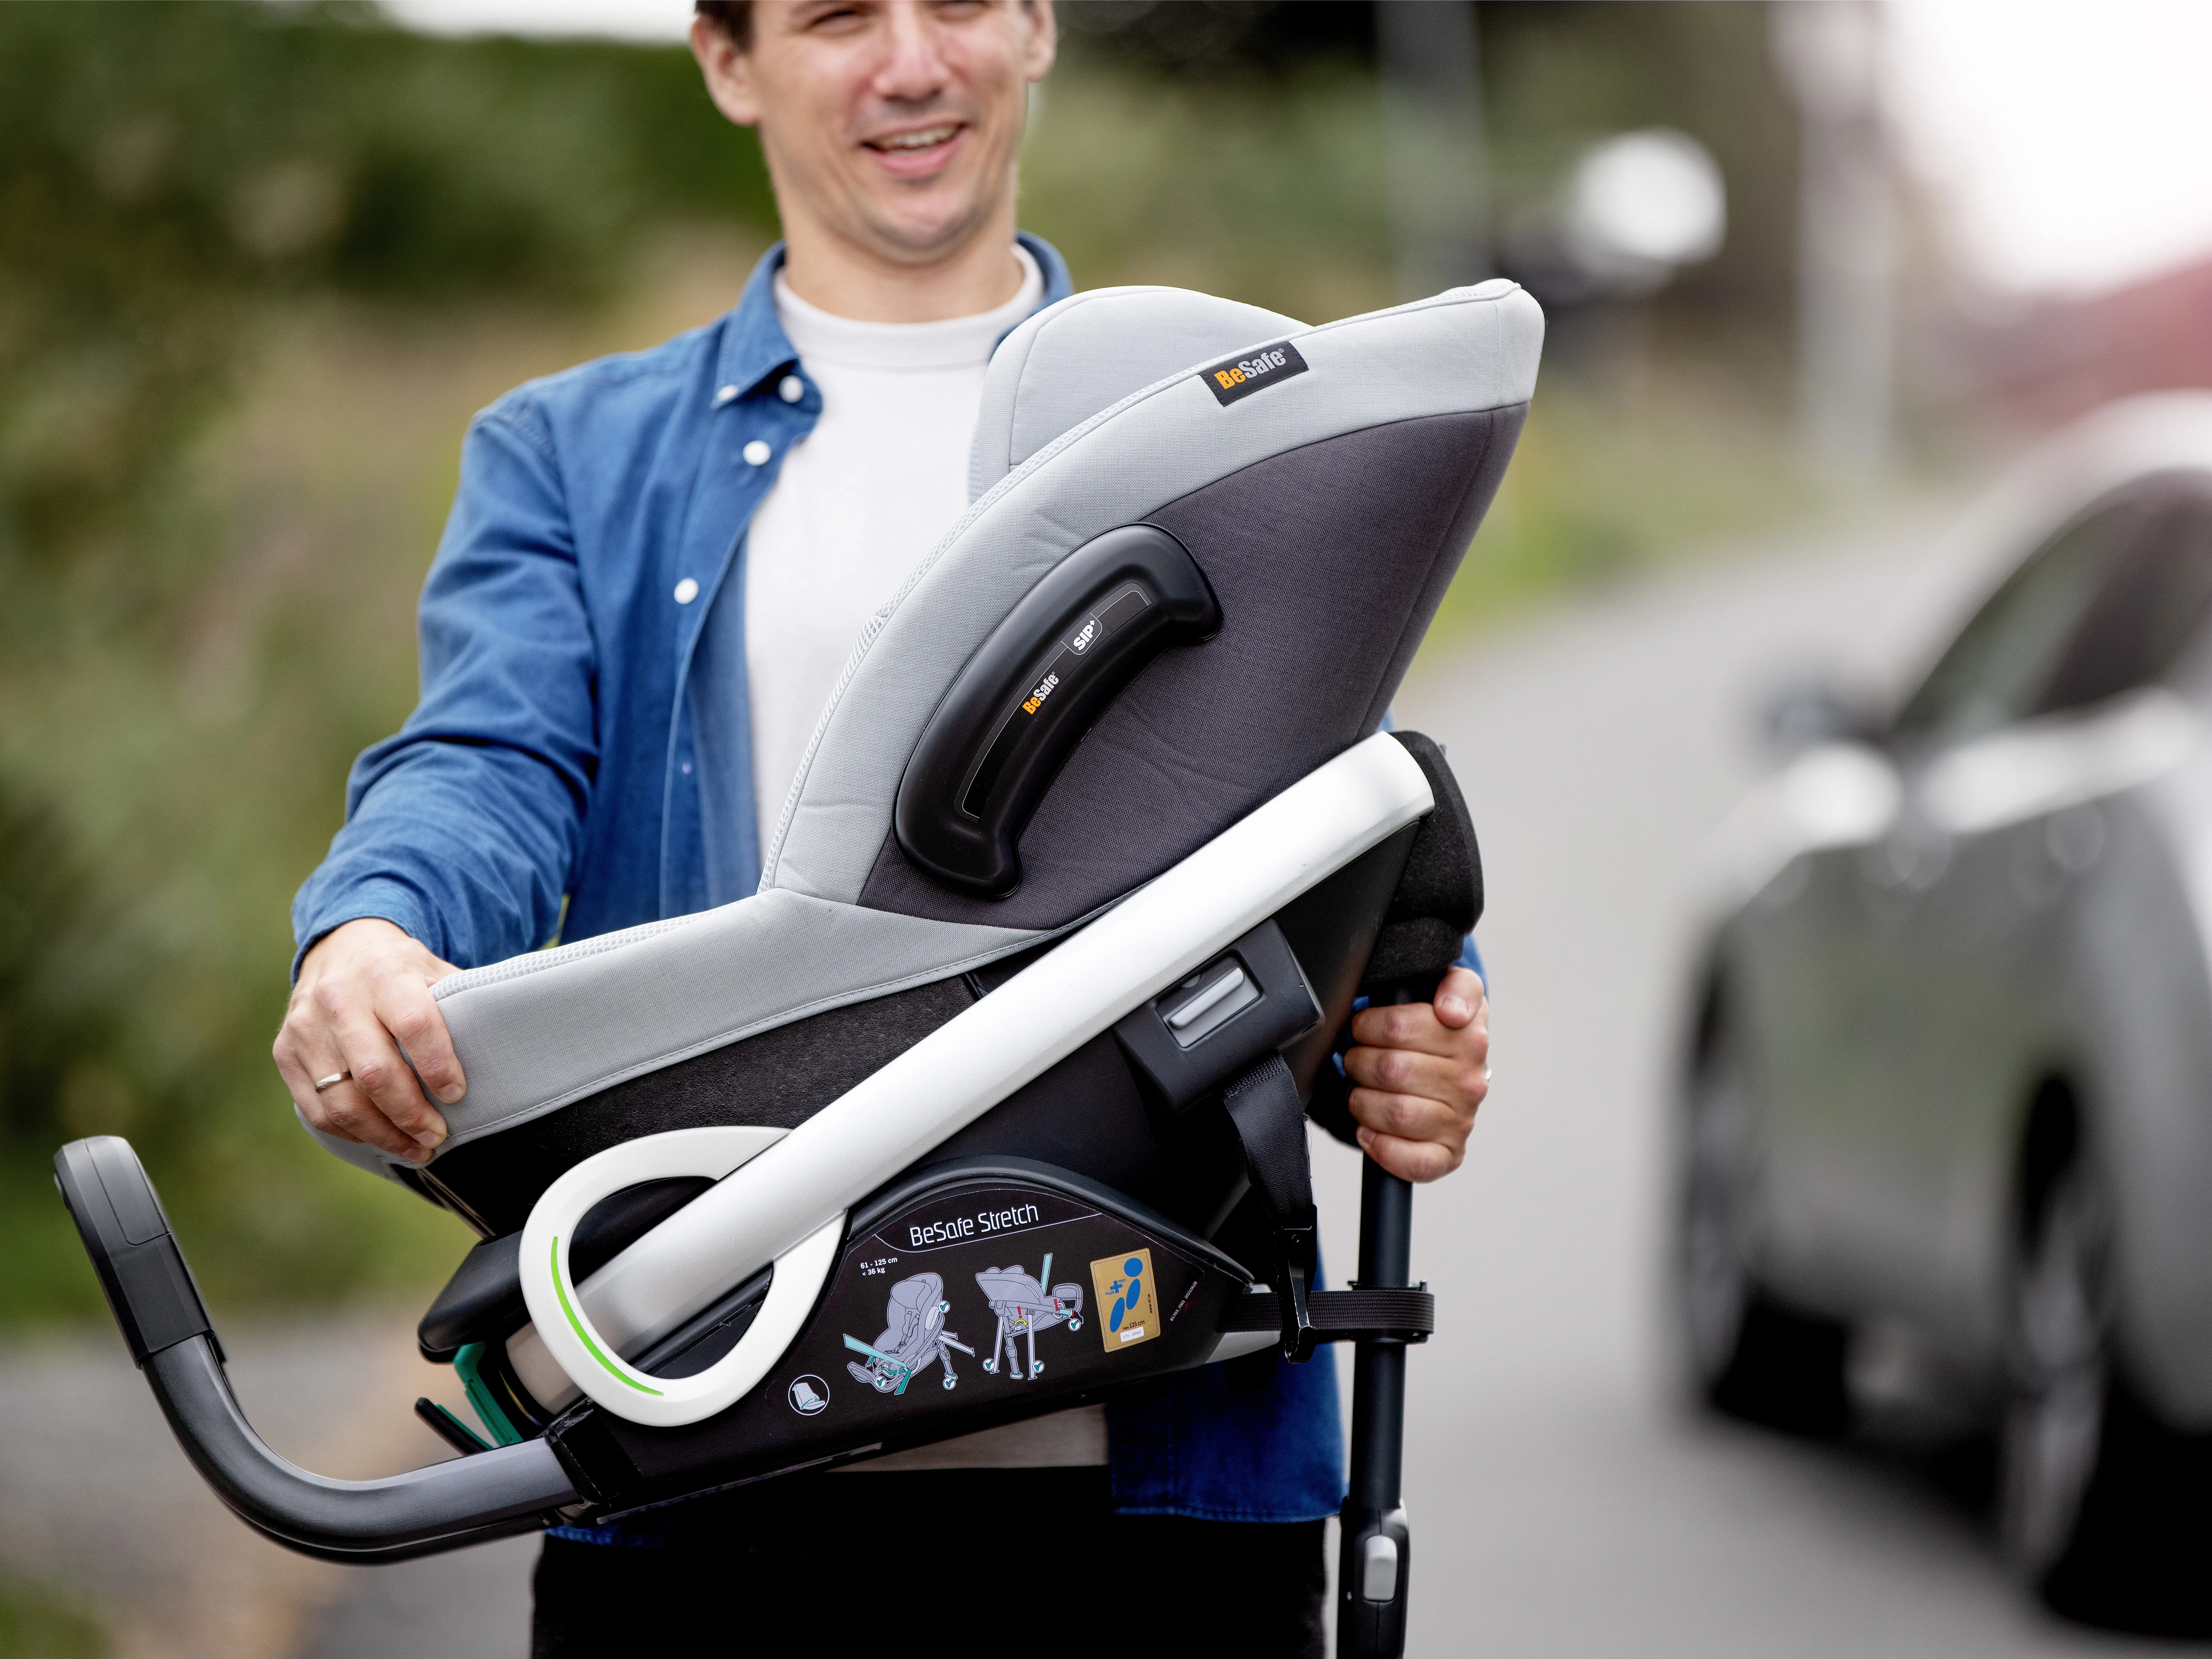 BeSafe: Developing the safest possible car seats for children of